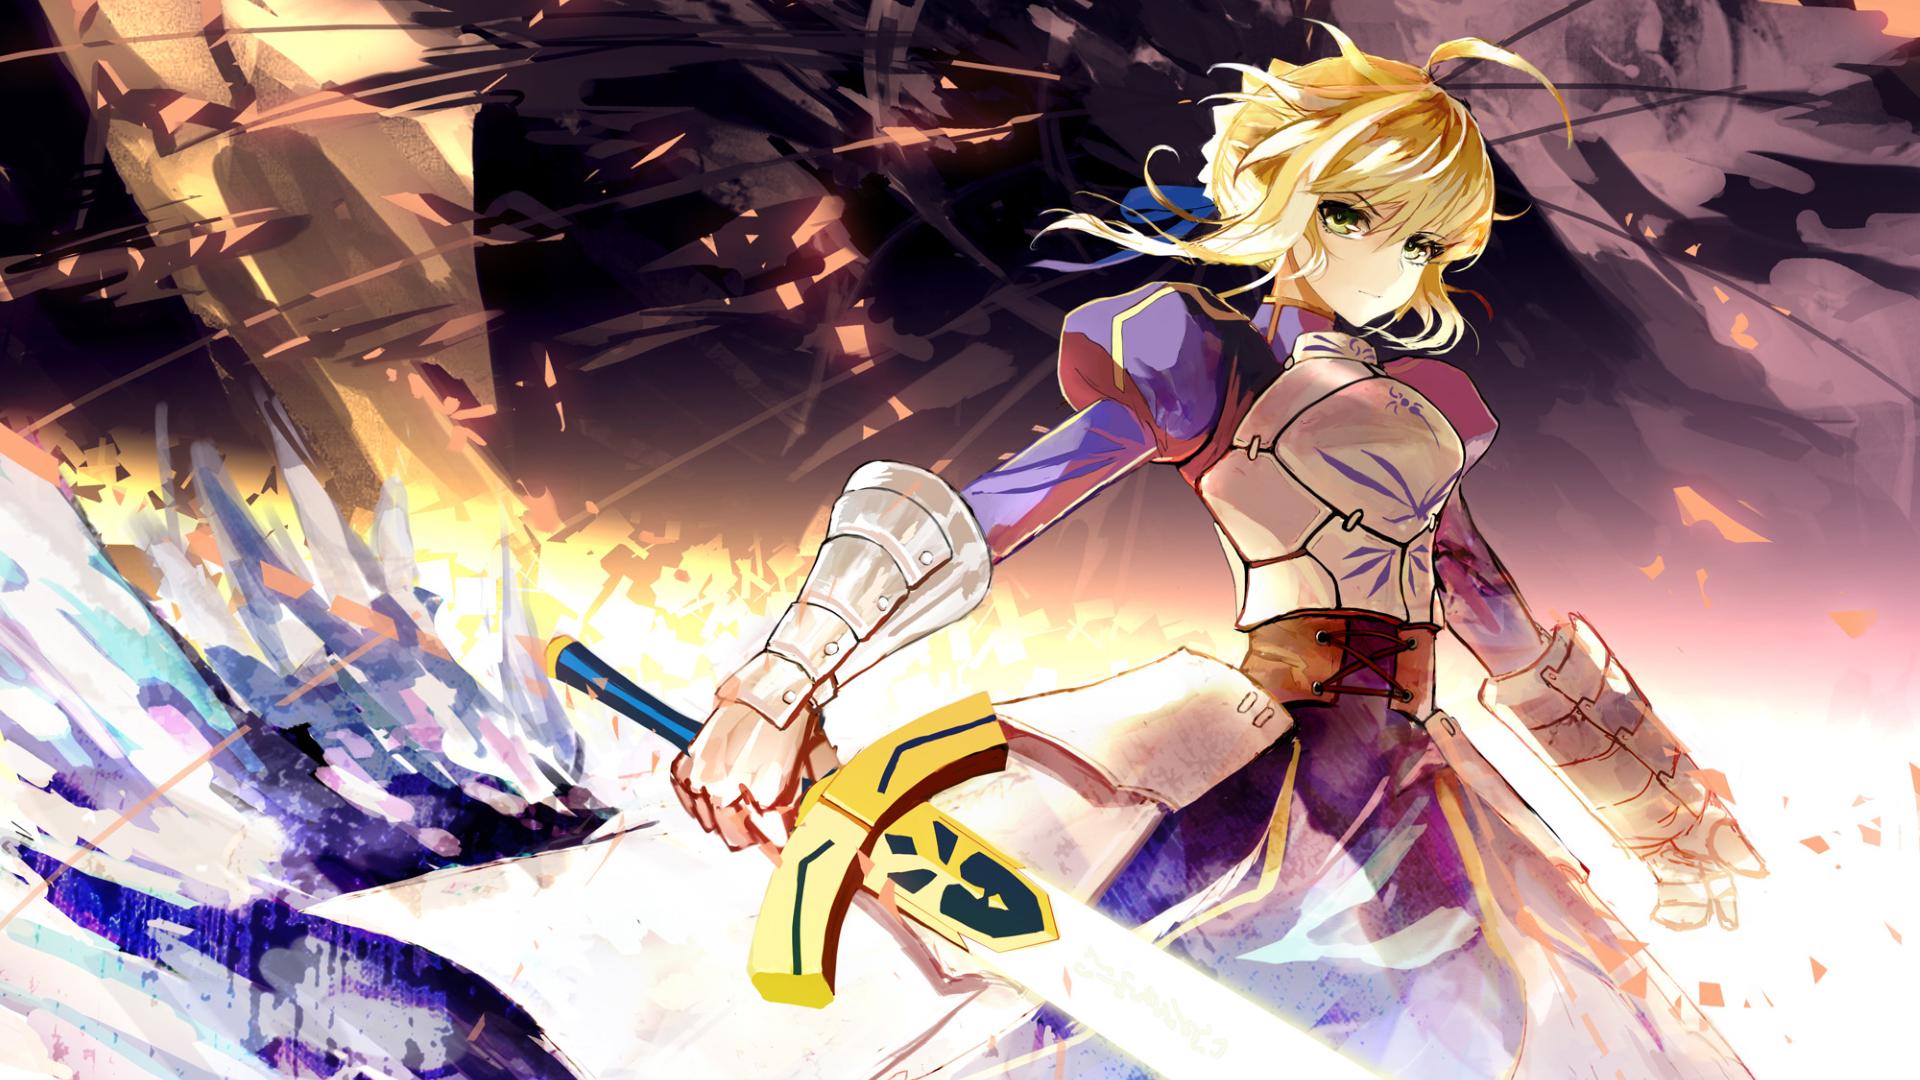 Anime 1920x1080 Saber blonde sword anime girls anime fantasy art fantasy girl weapon looking at viewer women with swords